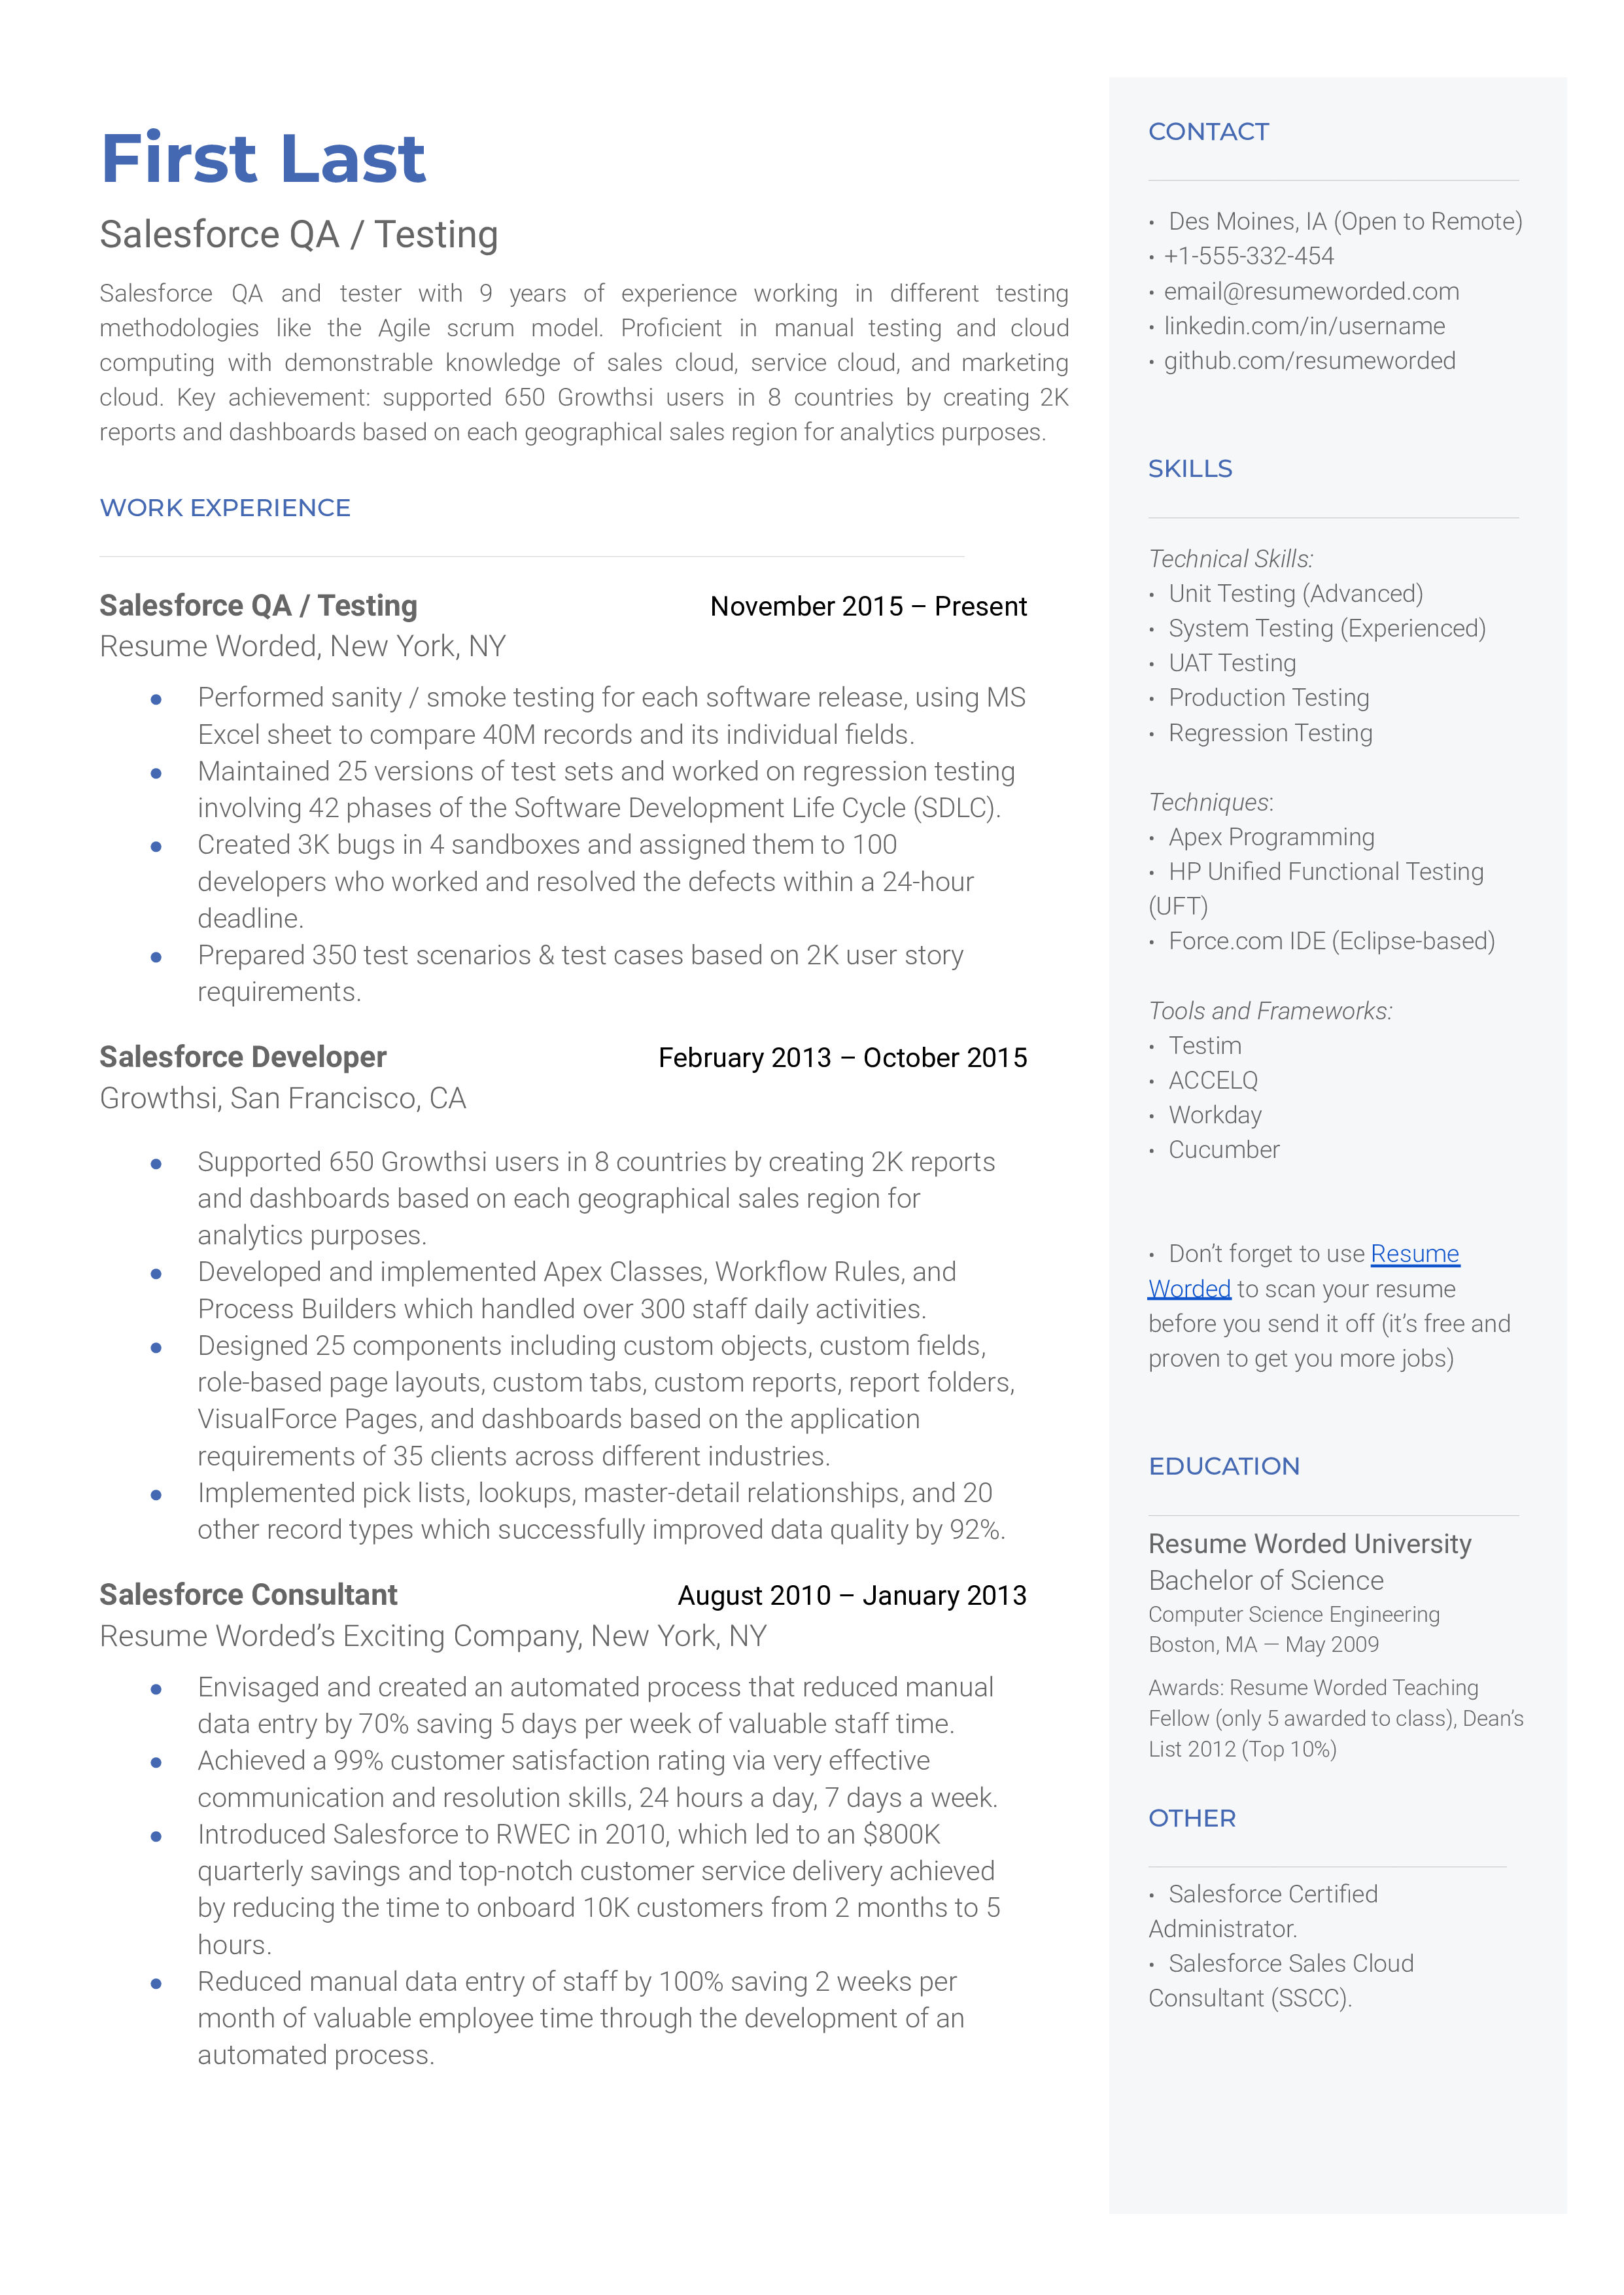 A two column Salesforce QA resume template that includes relevant work experience, education, and contact information